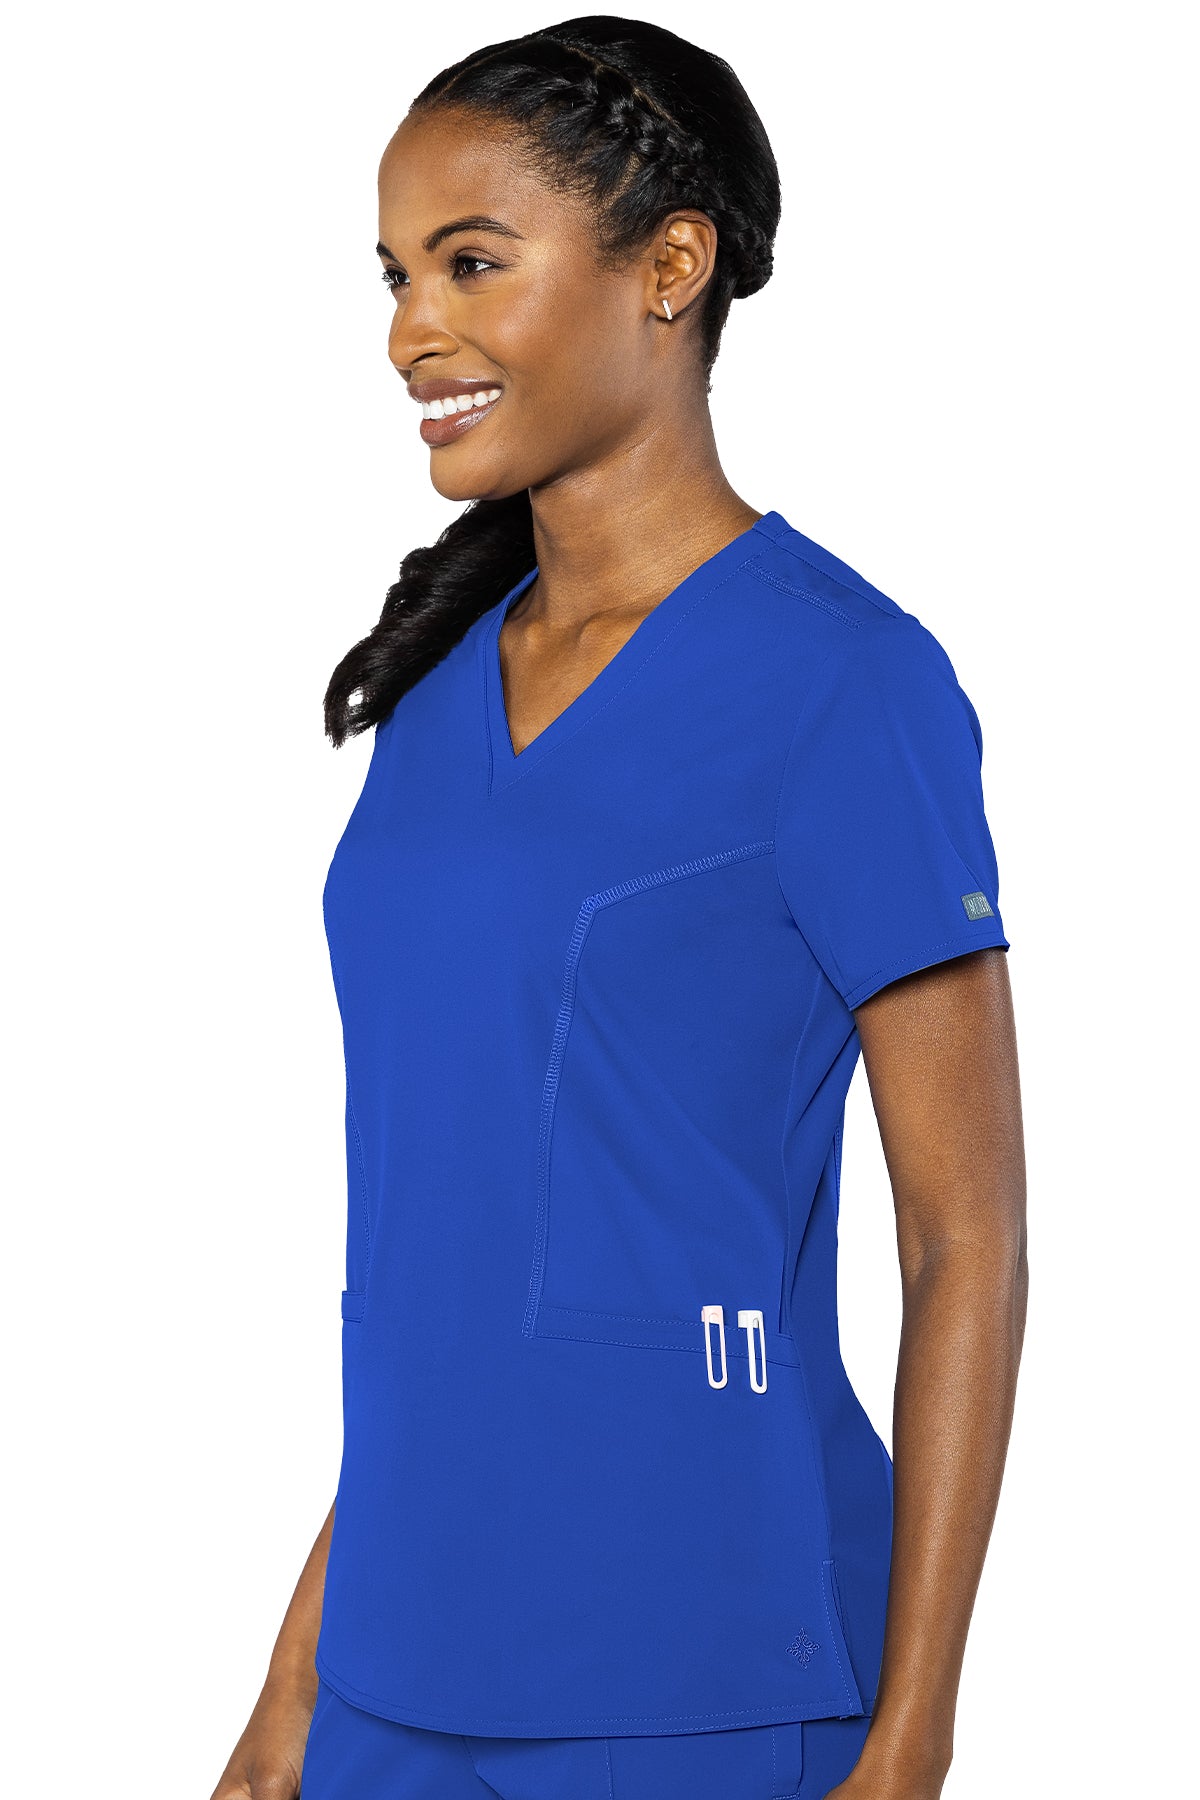 Double V Neck Top by Med Couture XS-3XL  /  Royal